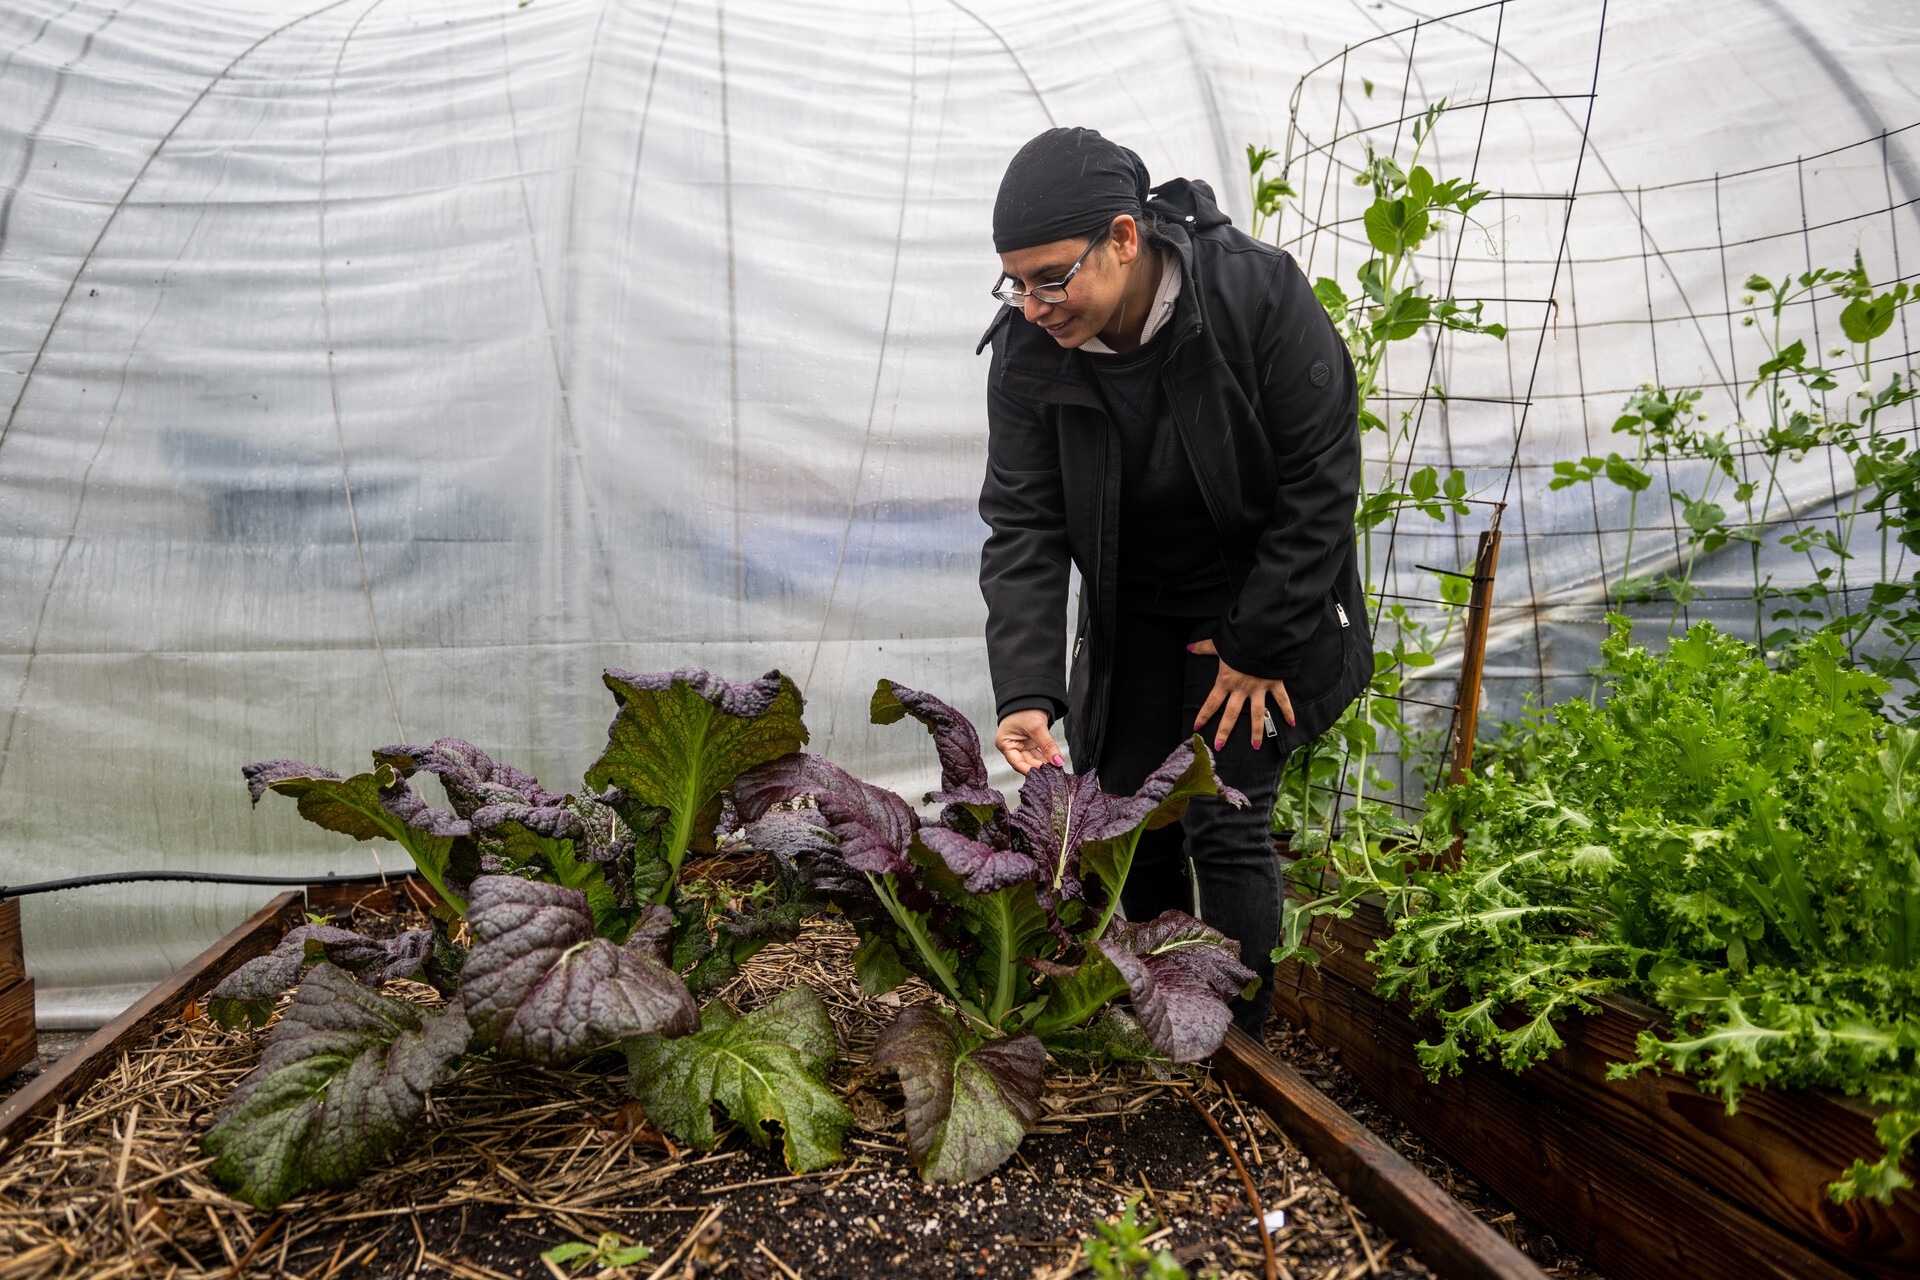 A bespectacled Indian woman with her head tightly covered in a black scarf twisted around her neck, bending over and holding the tip of a purple and green plant growing in a raised bed, between his forefinger and thumb. 